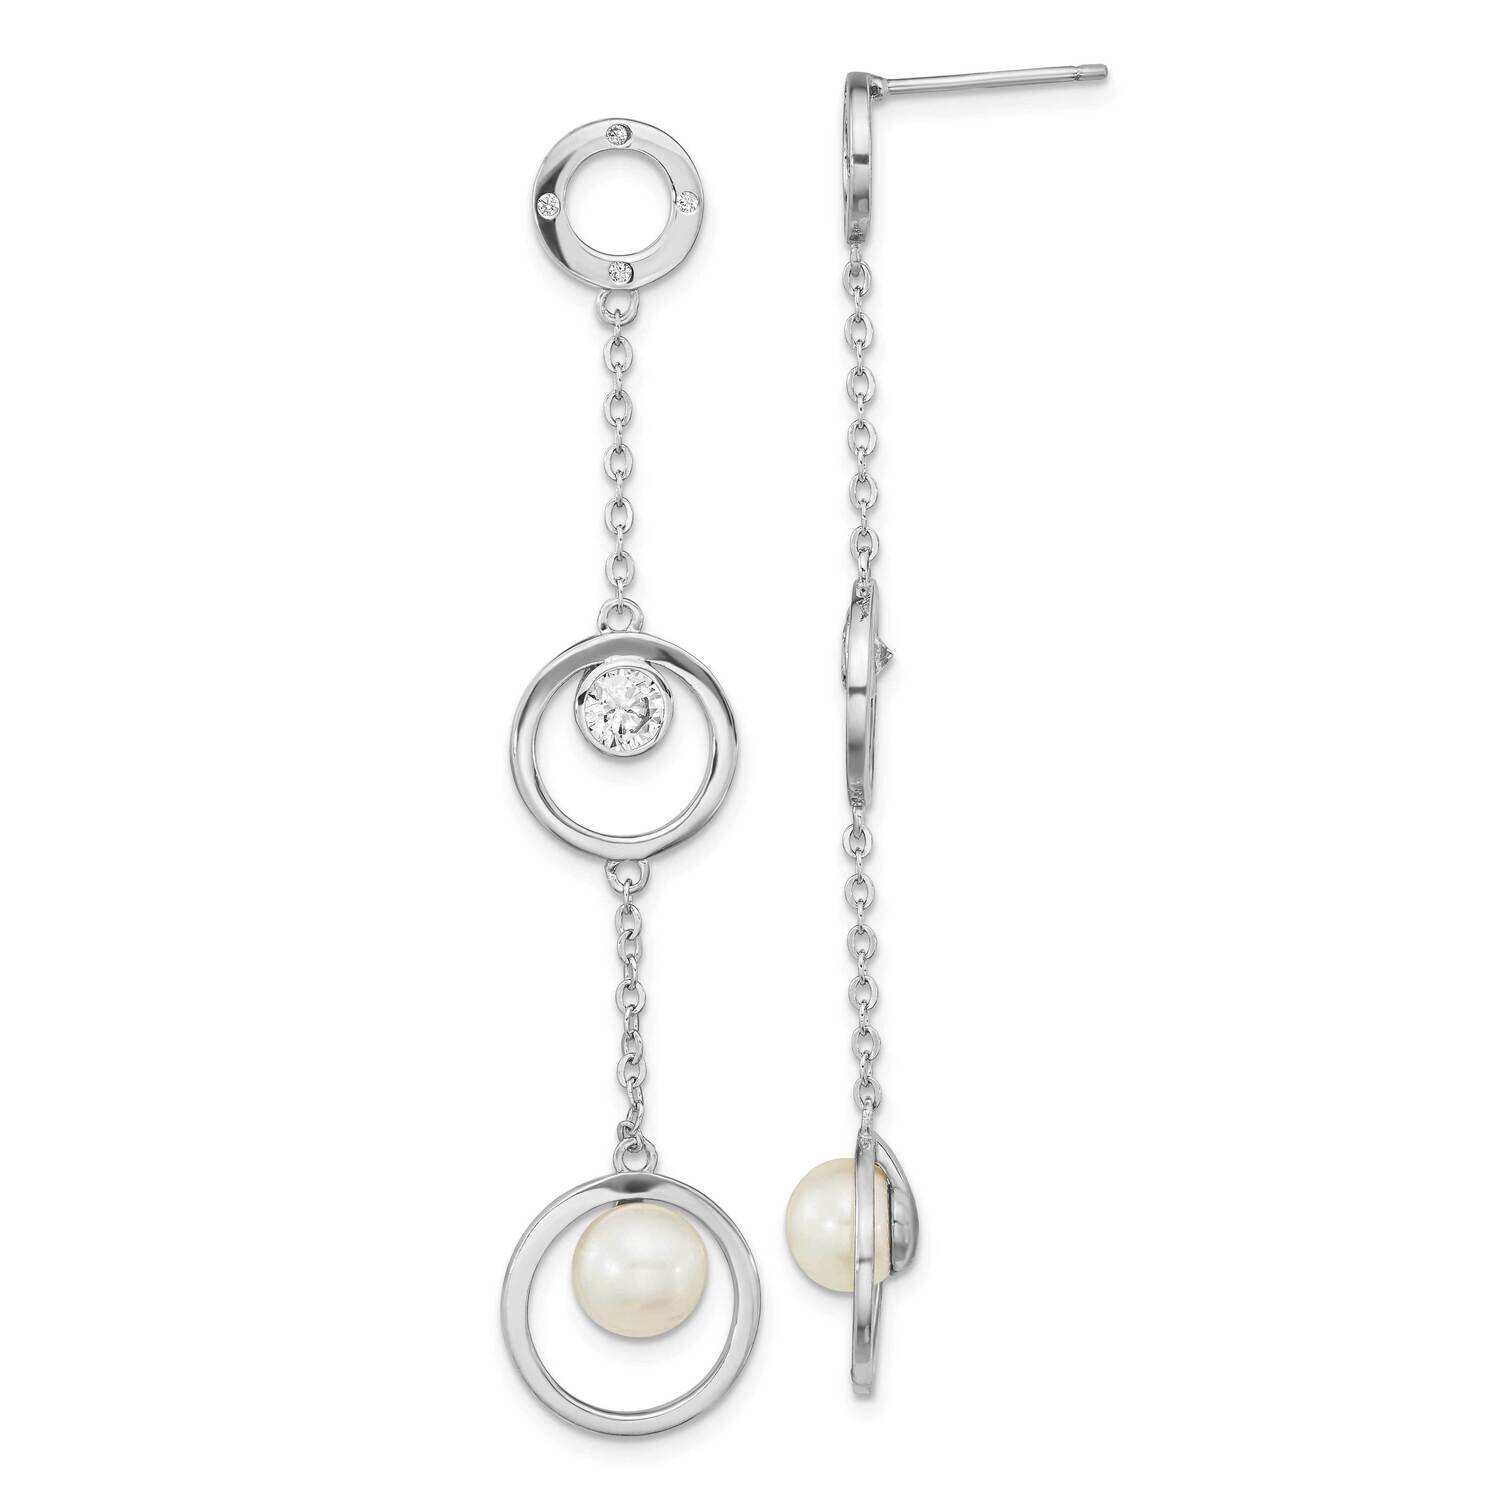 CZ Diamond 6-7mm White Button Fwc Pearl Earrings Sterling Silver Rhodium-Plated QE16359